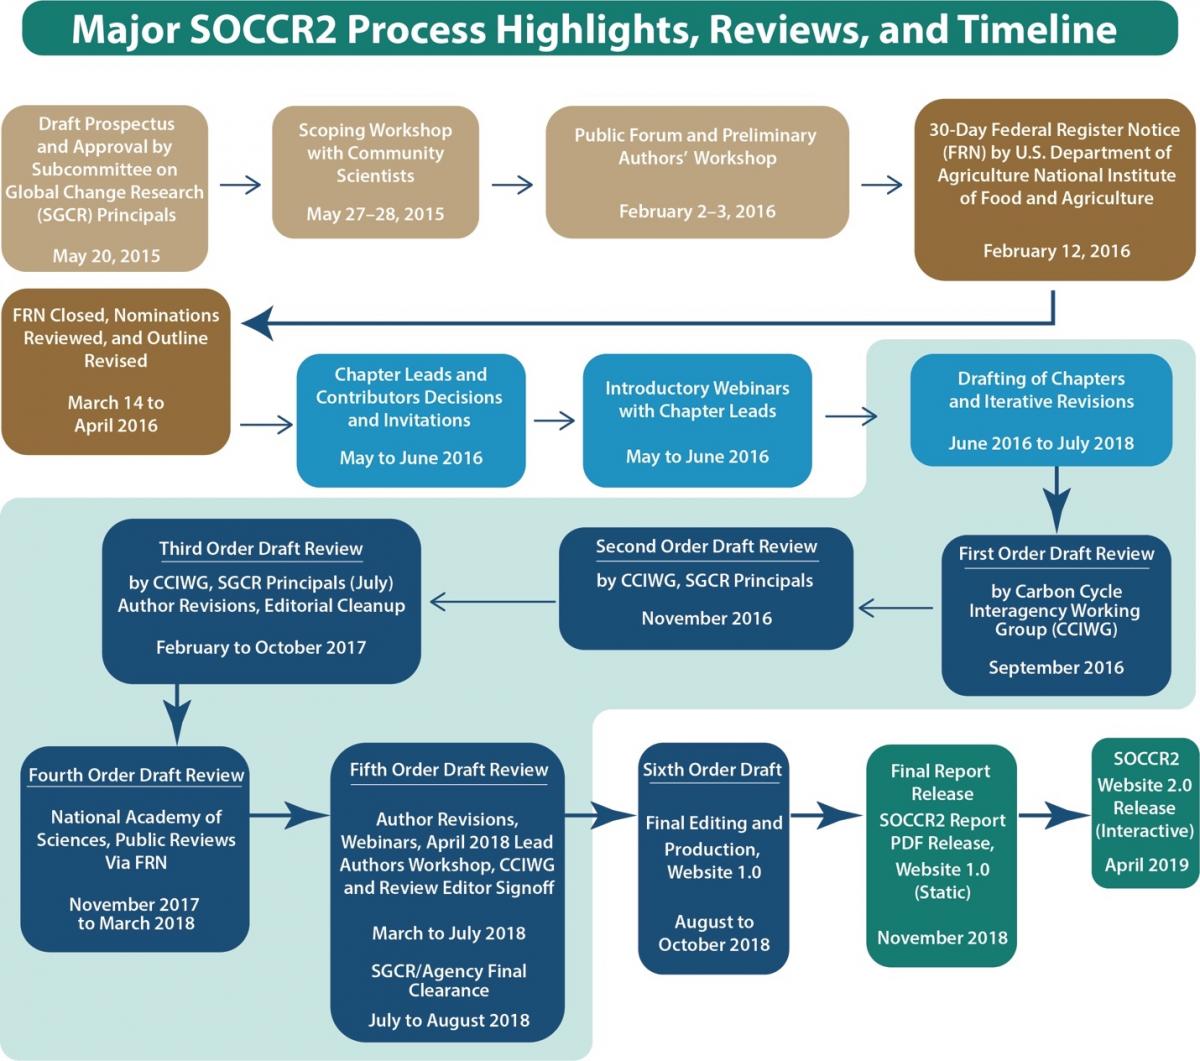 Major SOCCR2 milestones and planned next steps (as of September 2018, subject to change)